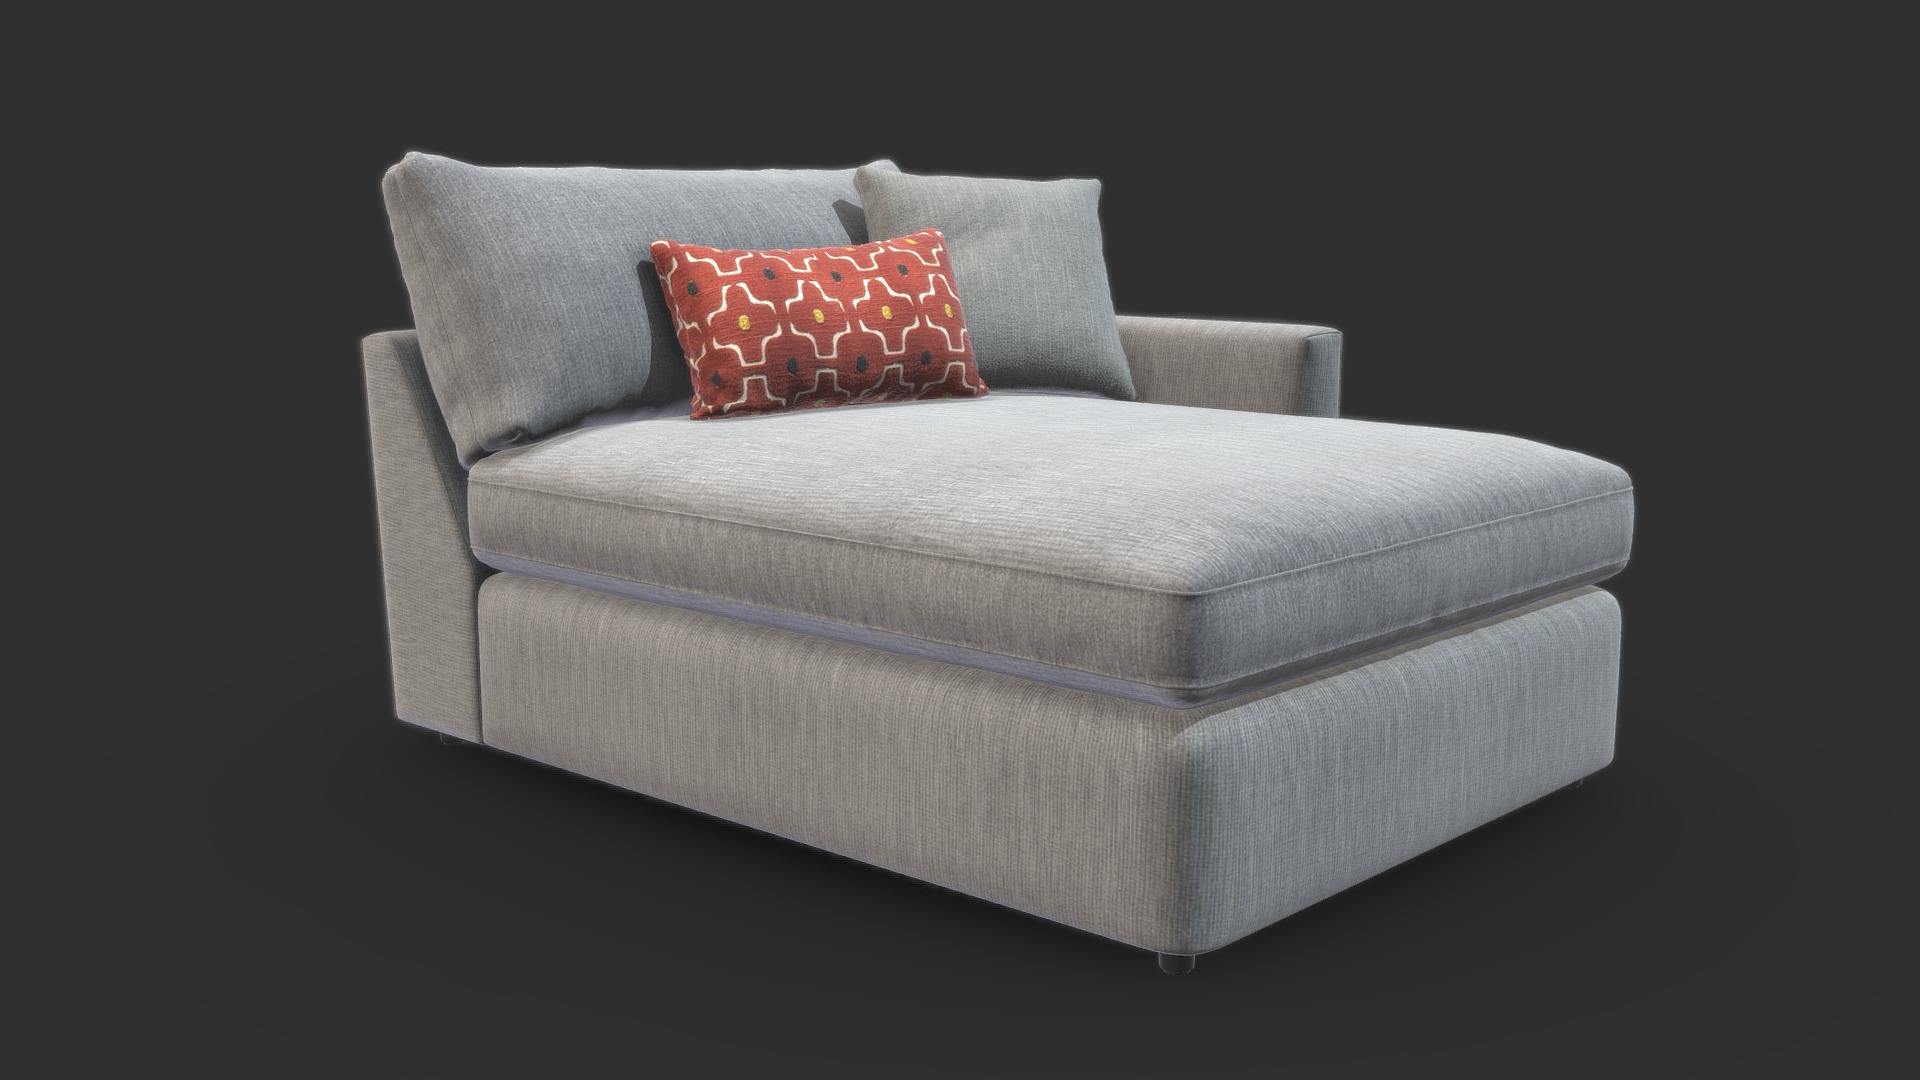 3D model Lounge II Petite Outdoor Upholstered Chaise - This is a 3D model of the Lounge II Petite Outdoor Upholstered Chaise. The 3D model is about a couch with pillows.